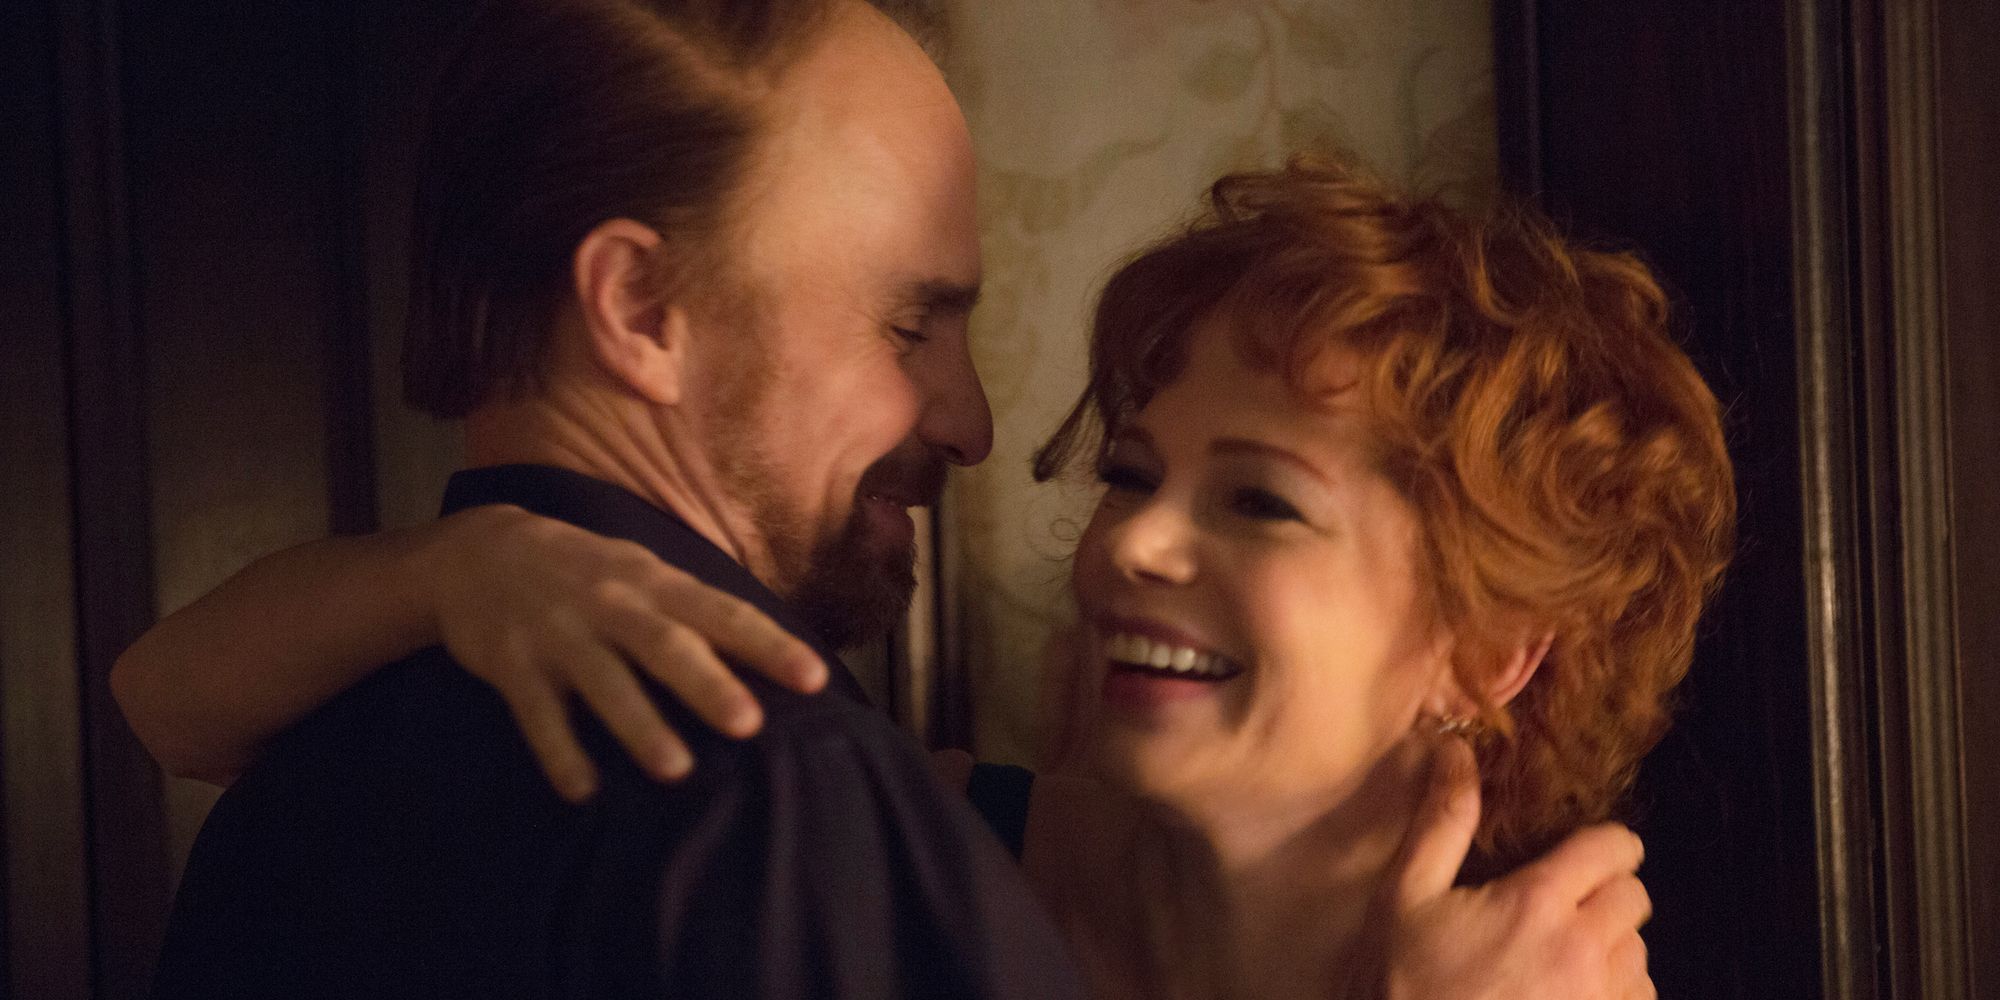 Sam Rockwell and Michelle Williams in Fosse Verdon FX